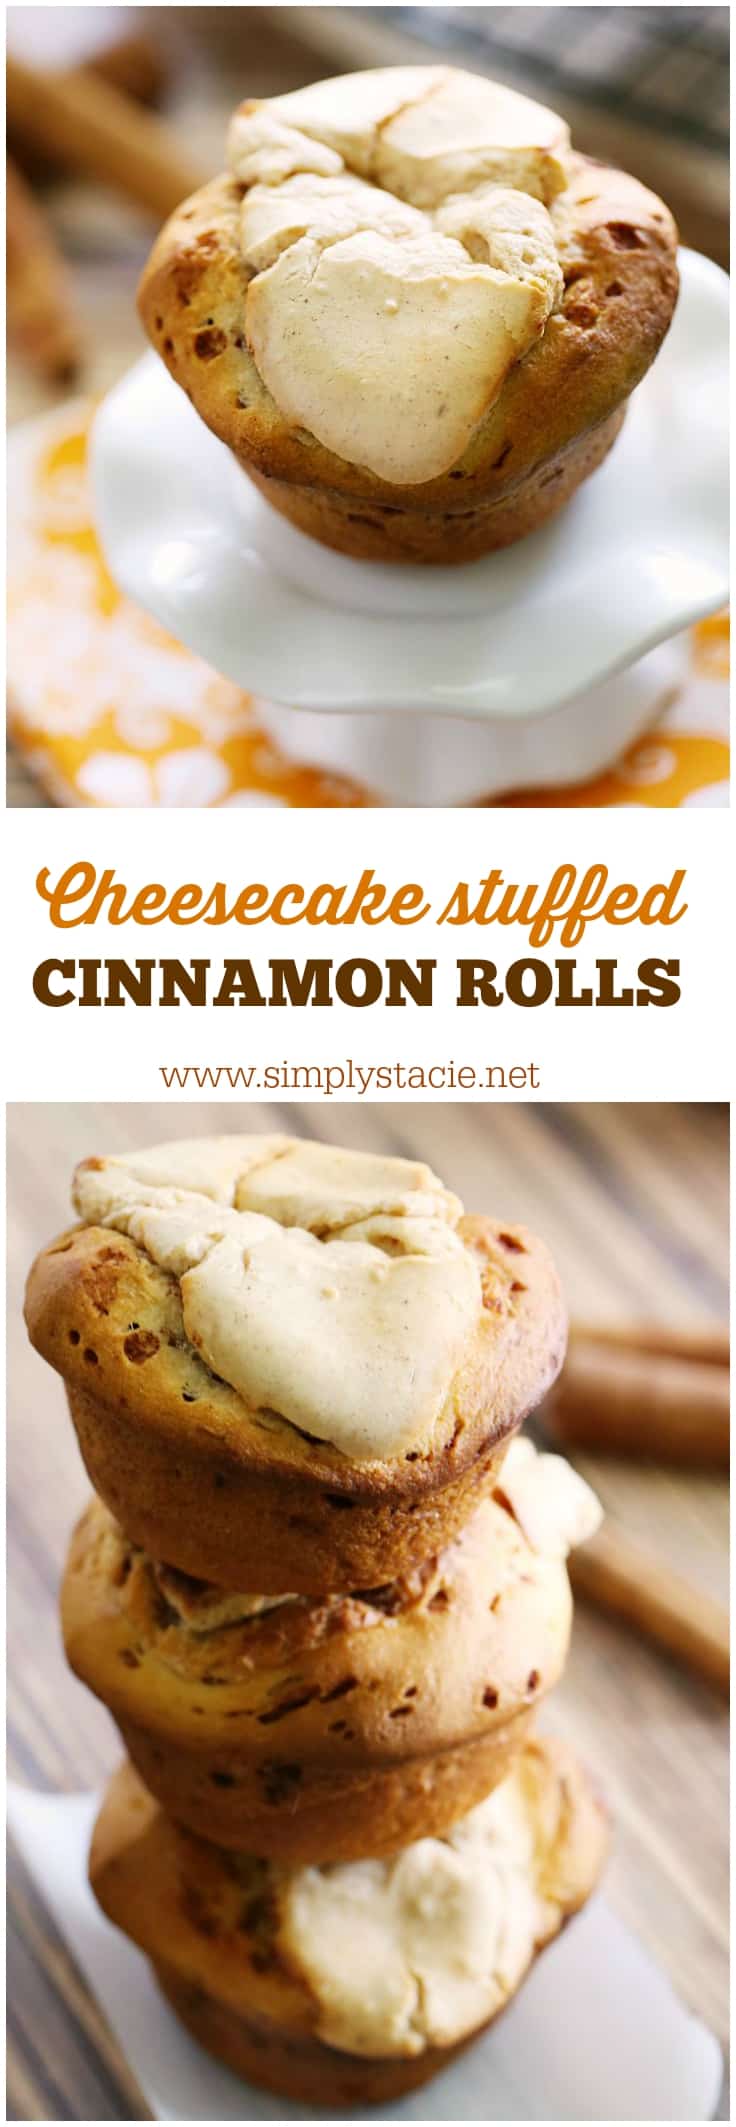 Cheesecake Stuffed Cinnamon Rolls - An easy cinnamon roll hack that will make your house smell SO GOOD. Cheesecake filling is stuffed inside refrigerated cinnamon rolls for a perfect dessert.